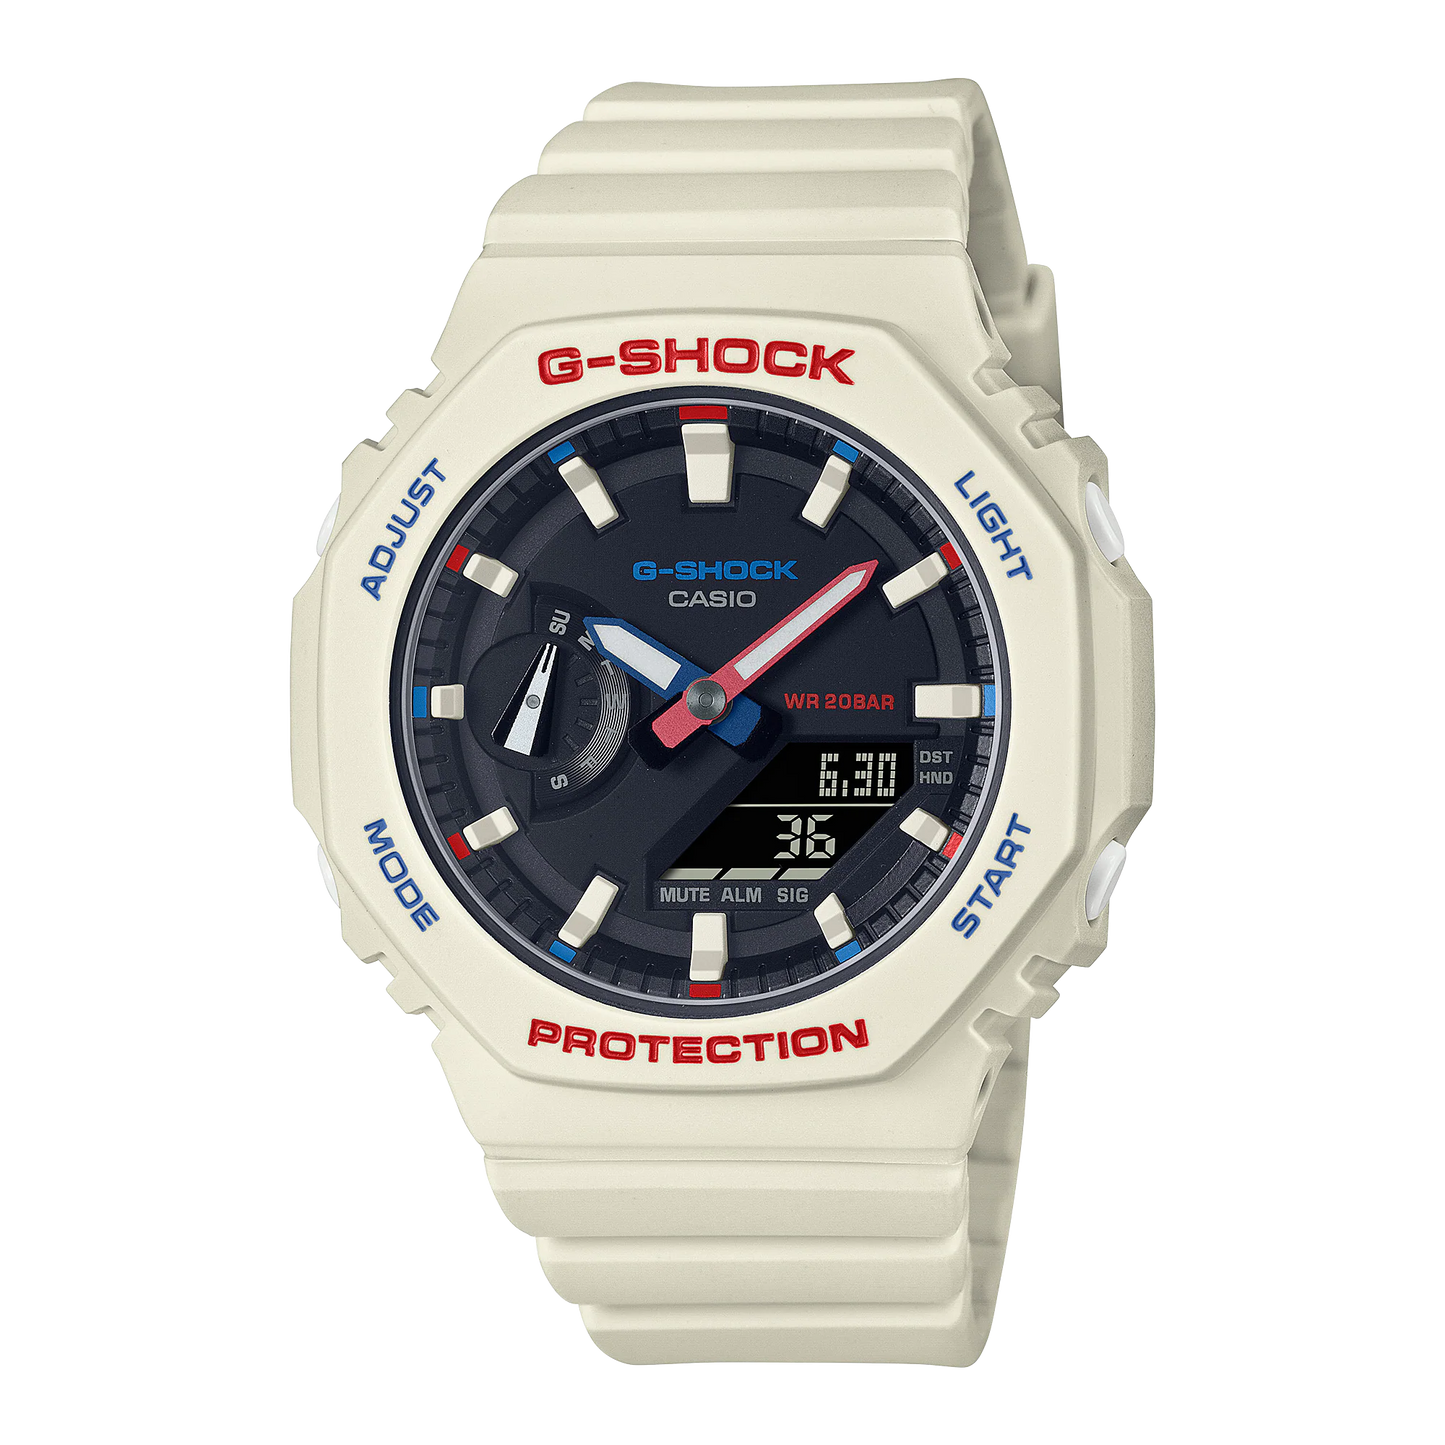 Casio G-Shock Analog Digital White Tricolor White Resin Watch - GMA-S2100WT-7A1